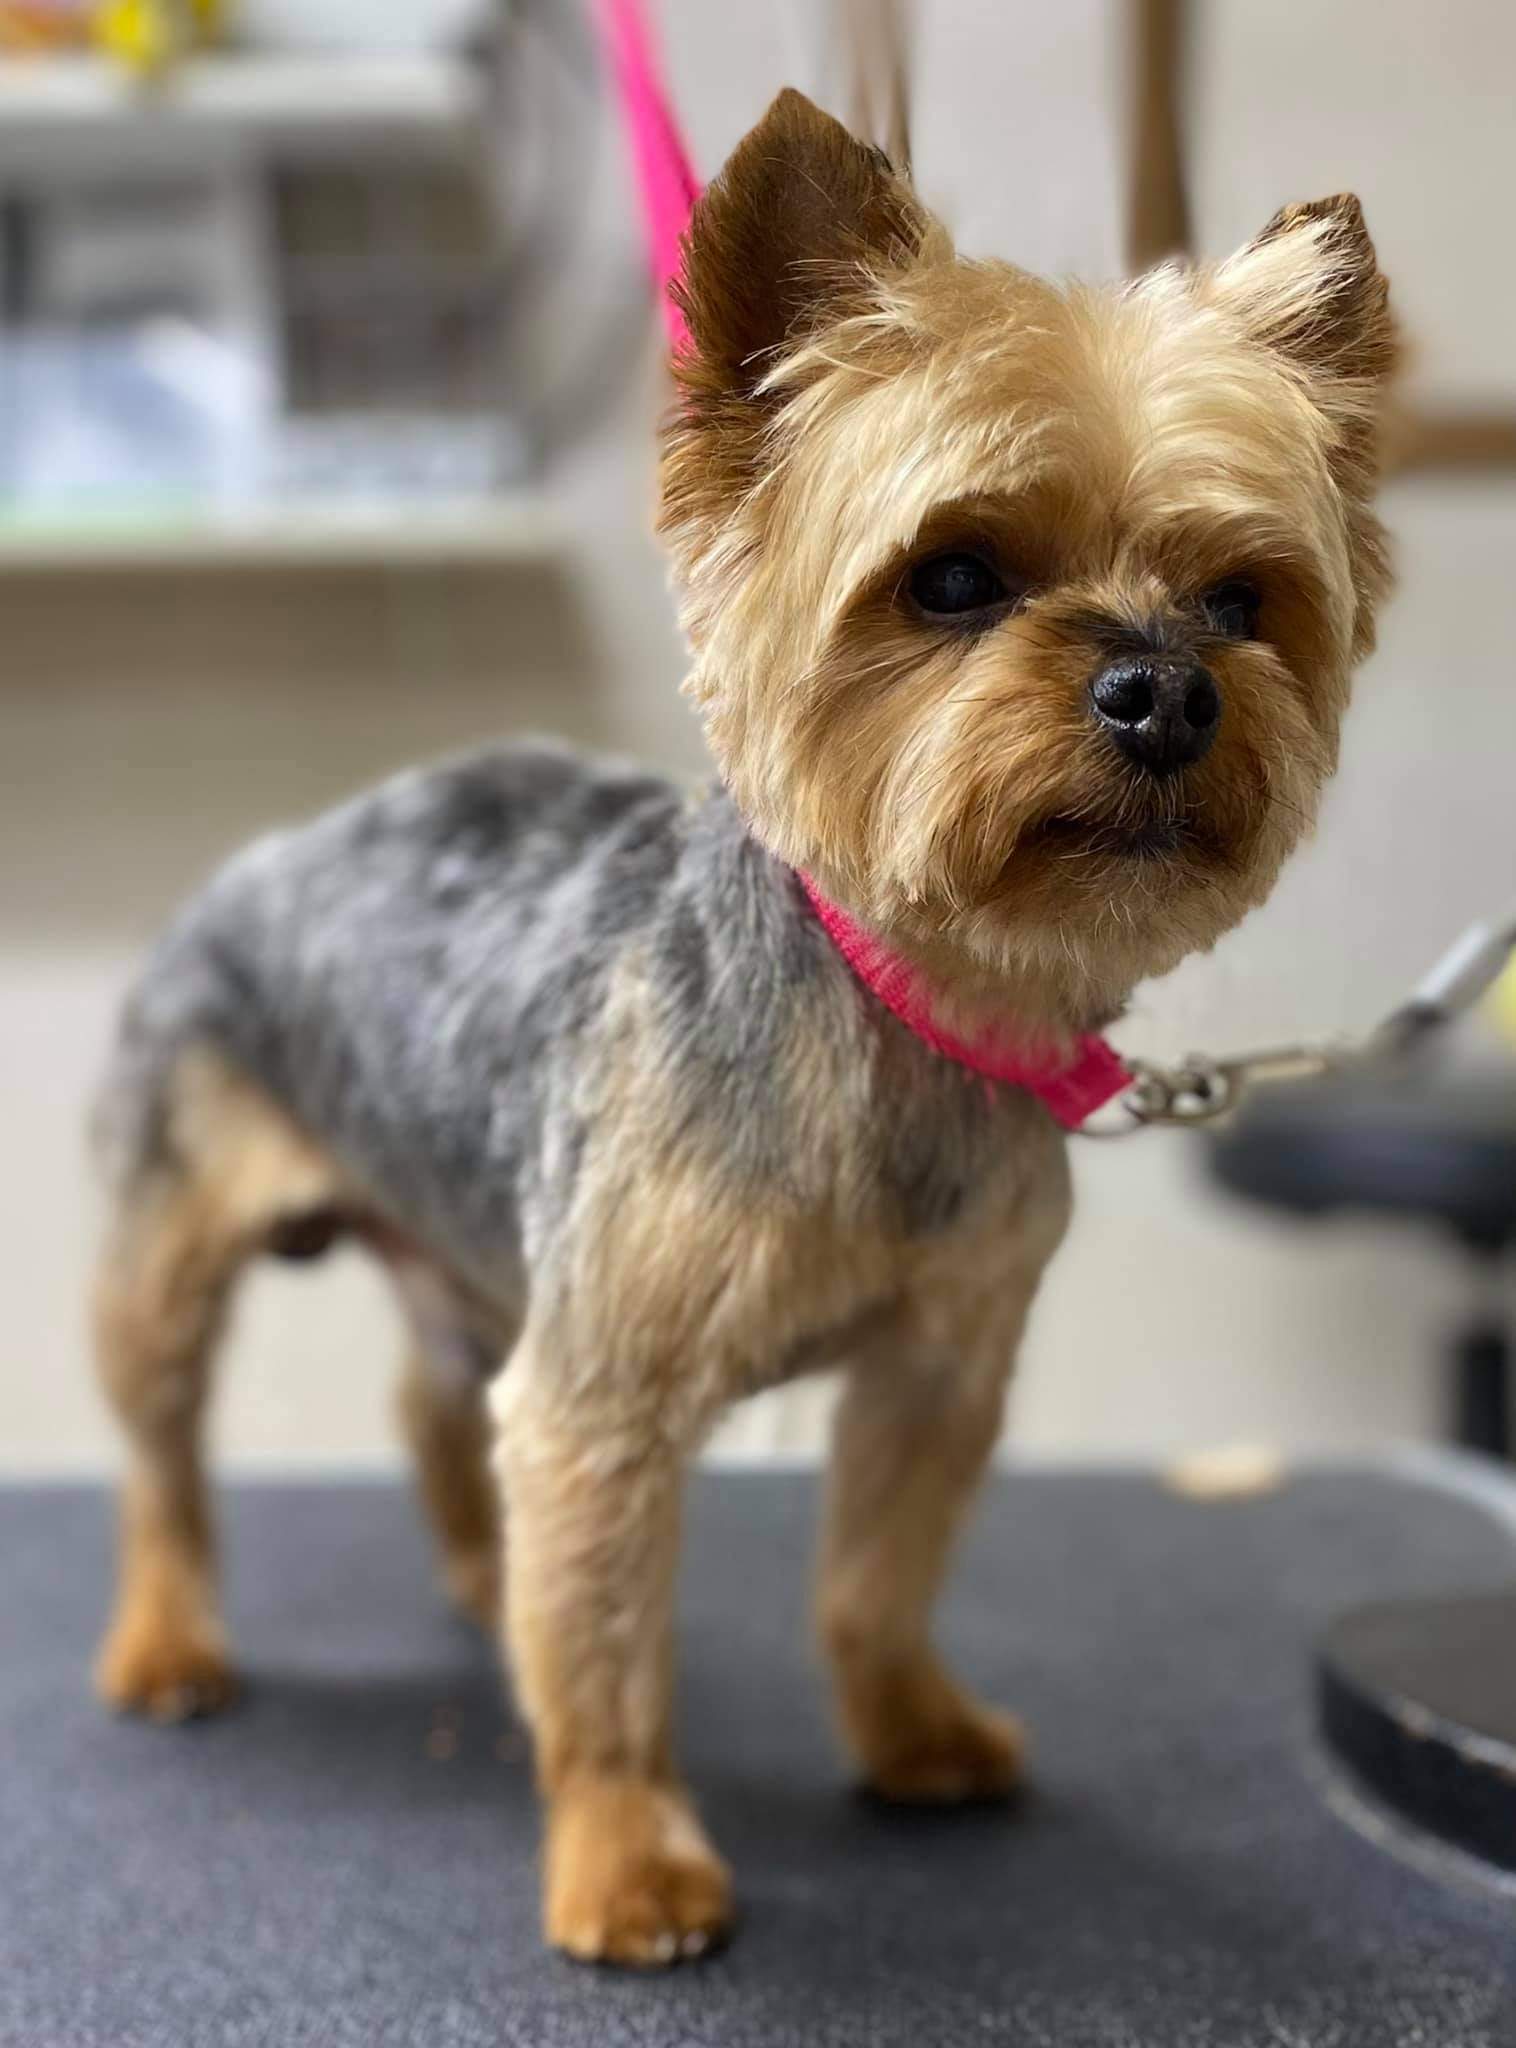 Yorkie groomed by student at mastergroomersacademy.com